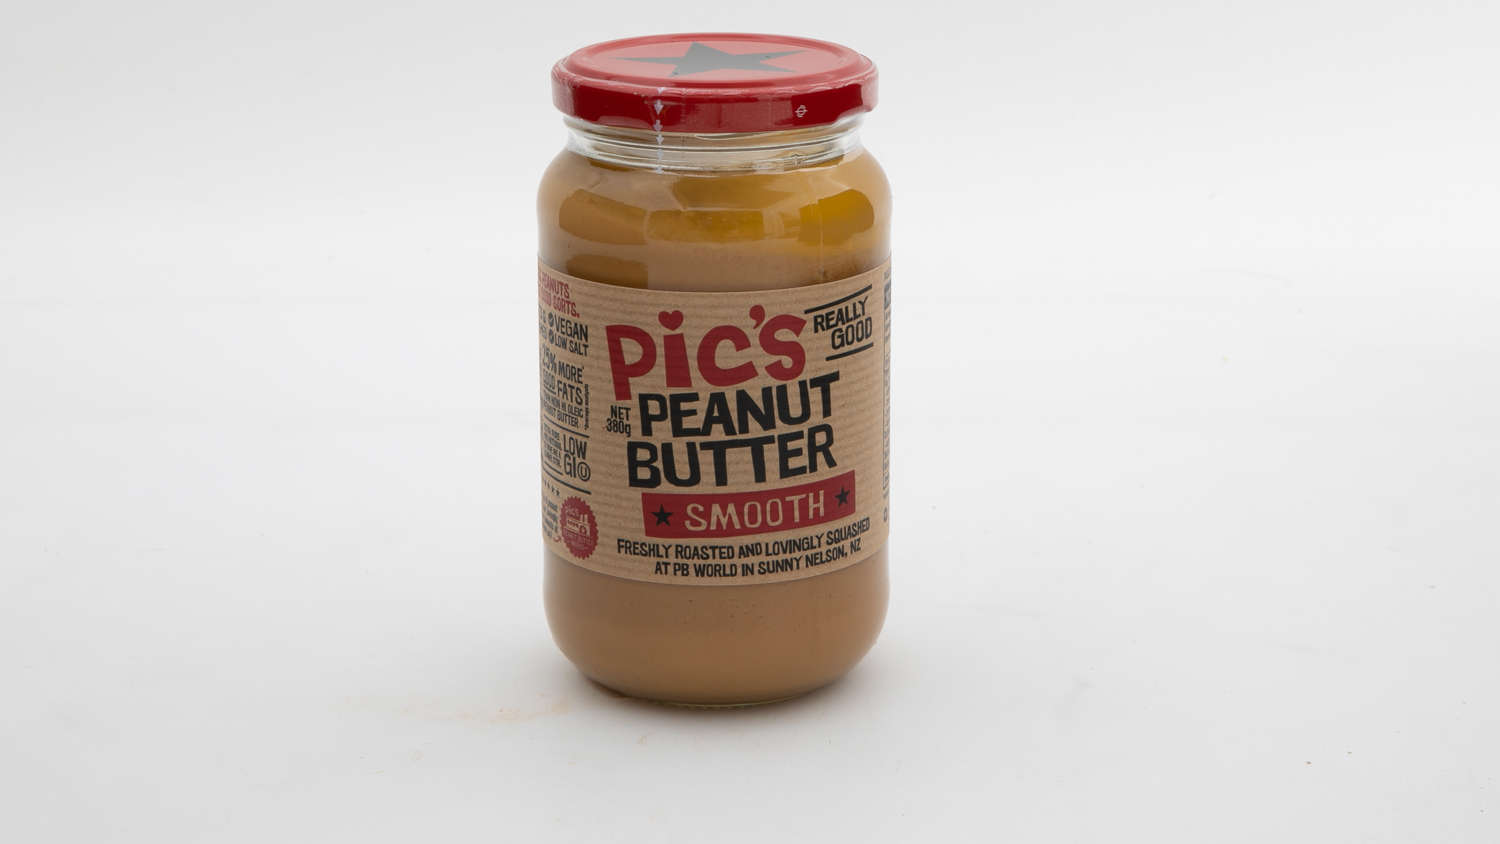 Pic's Peanut Butter Smooth carousel image